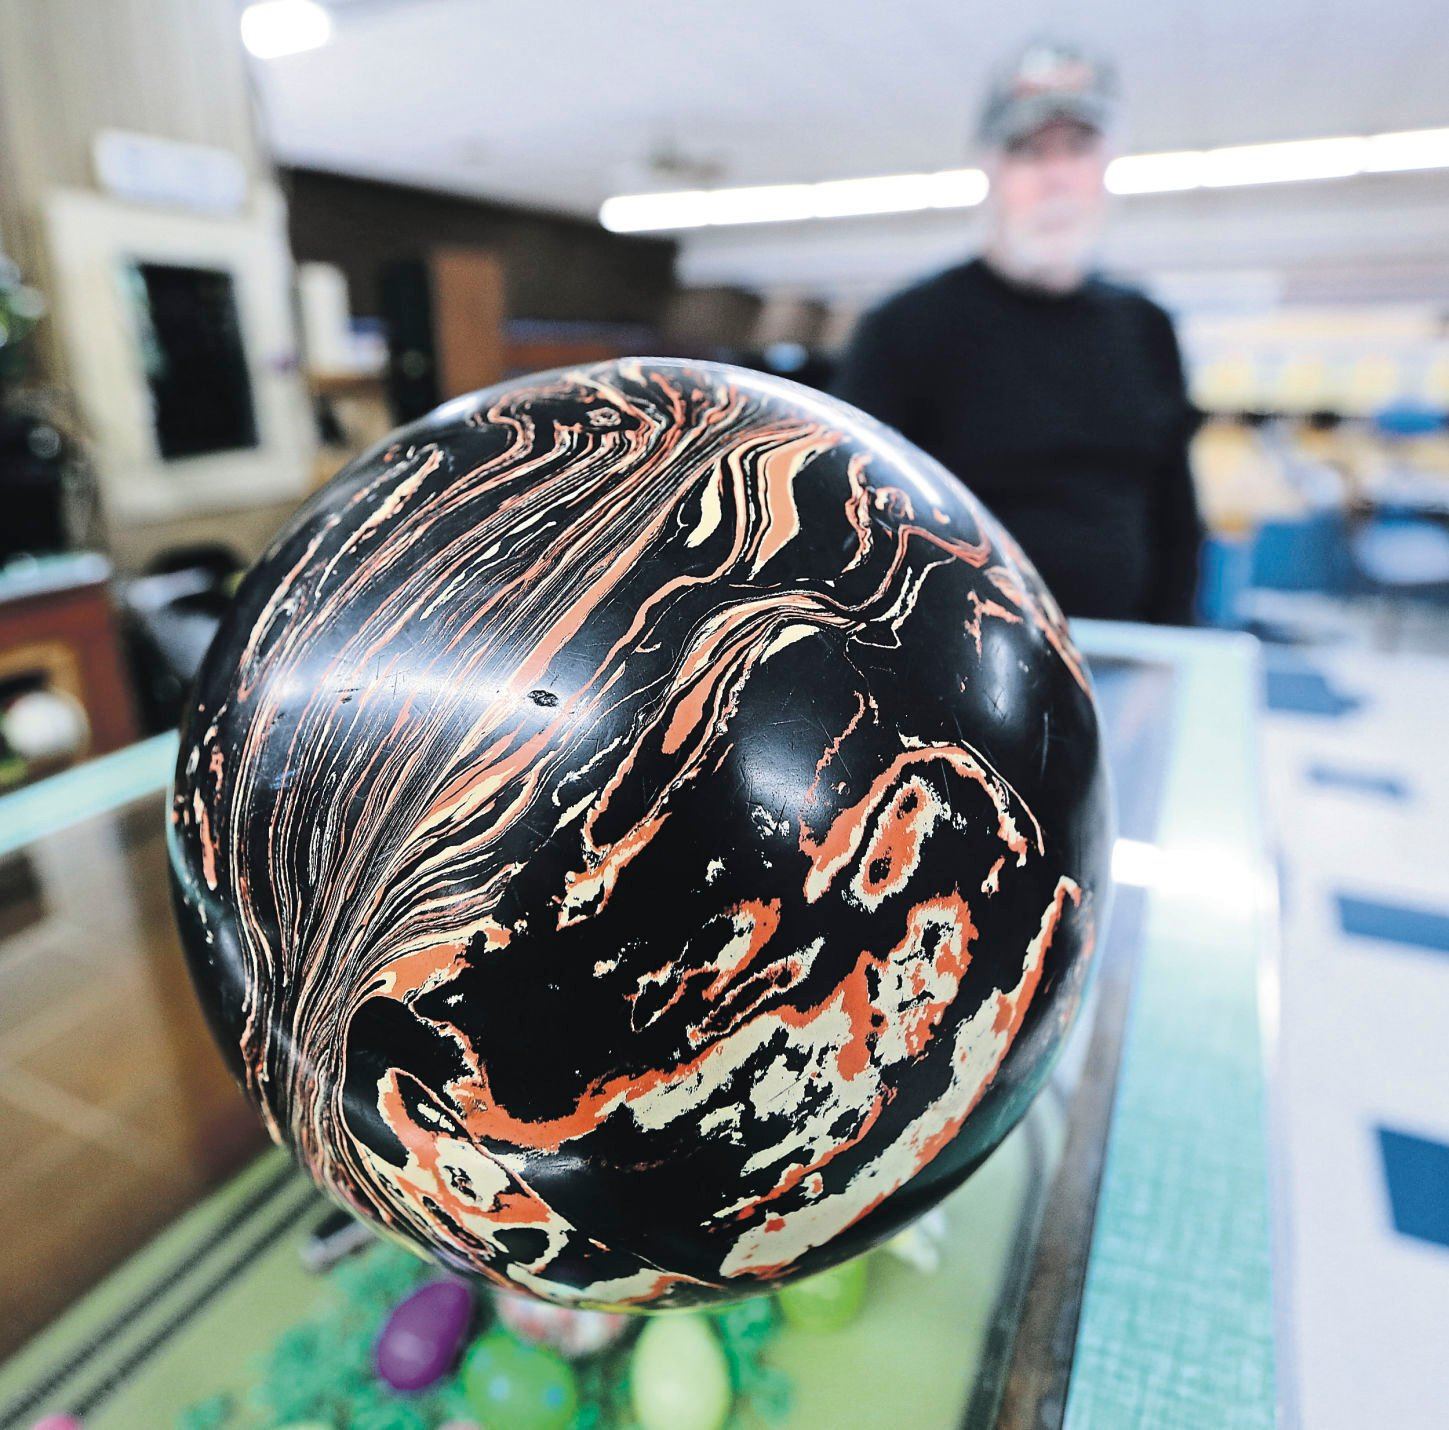 A bowling ball from the 1940s that is in use today.    PHOTO CREDIT: Dave Kettering